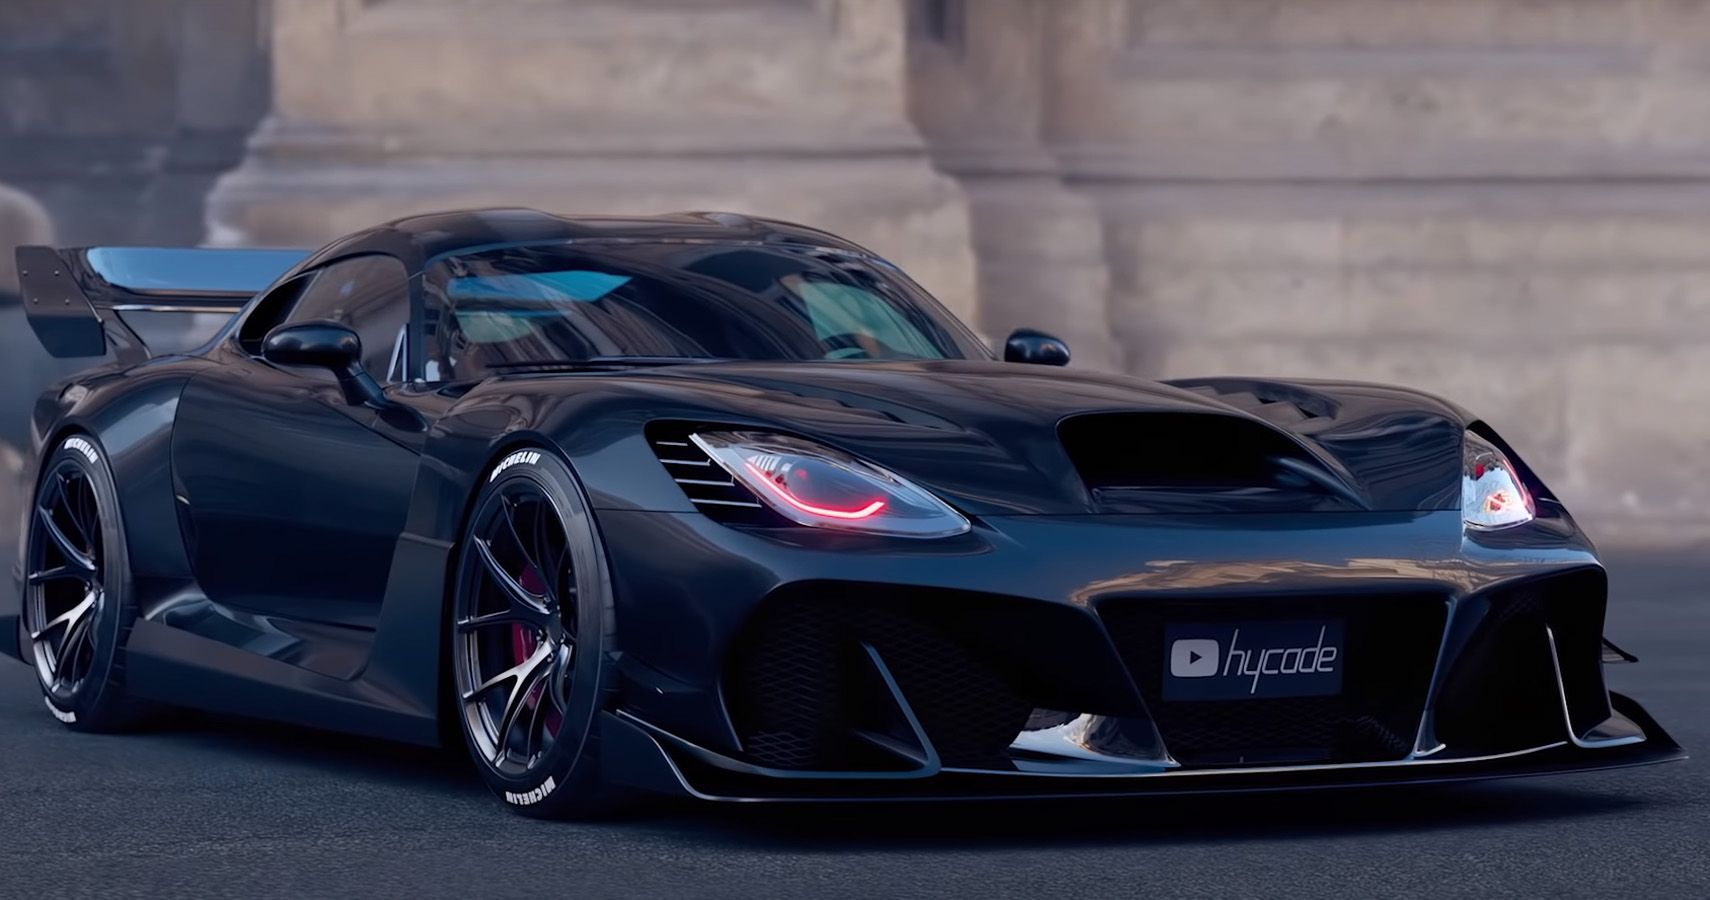 Black Dodge Viper rendering right front view